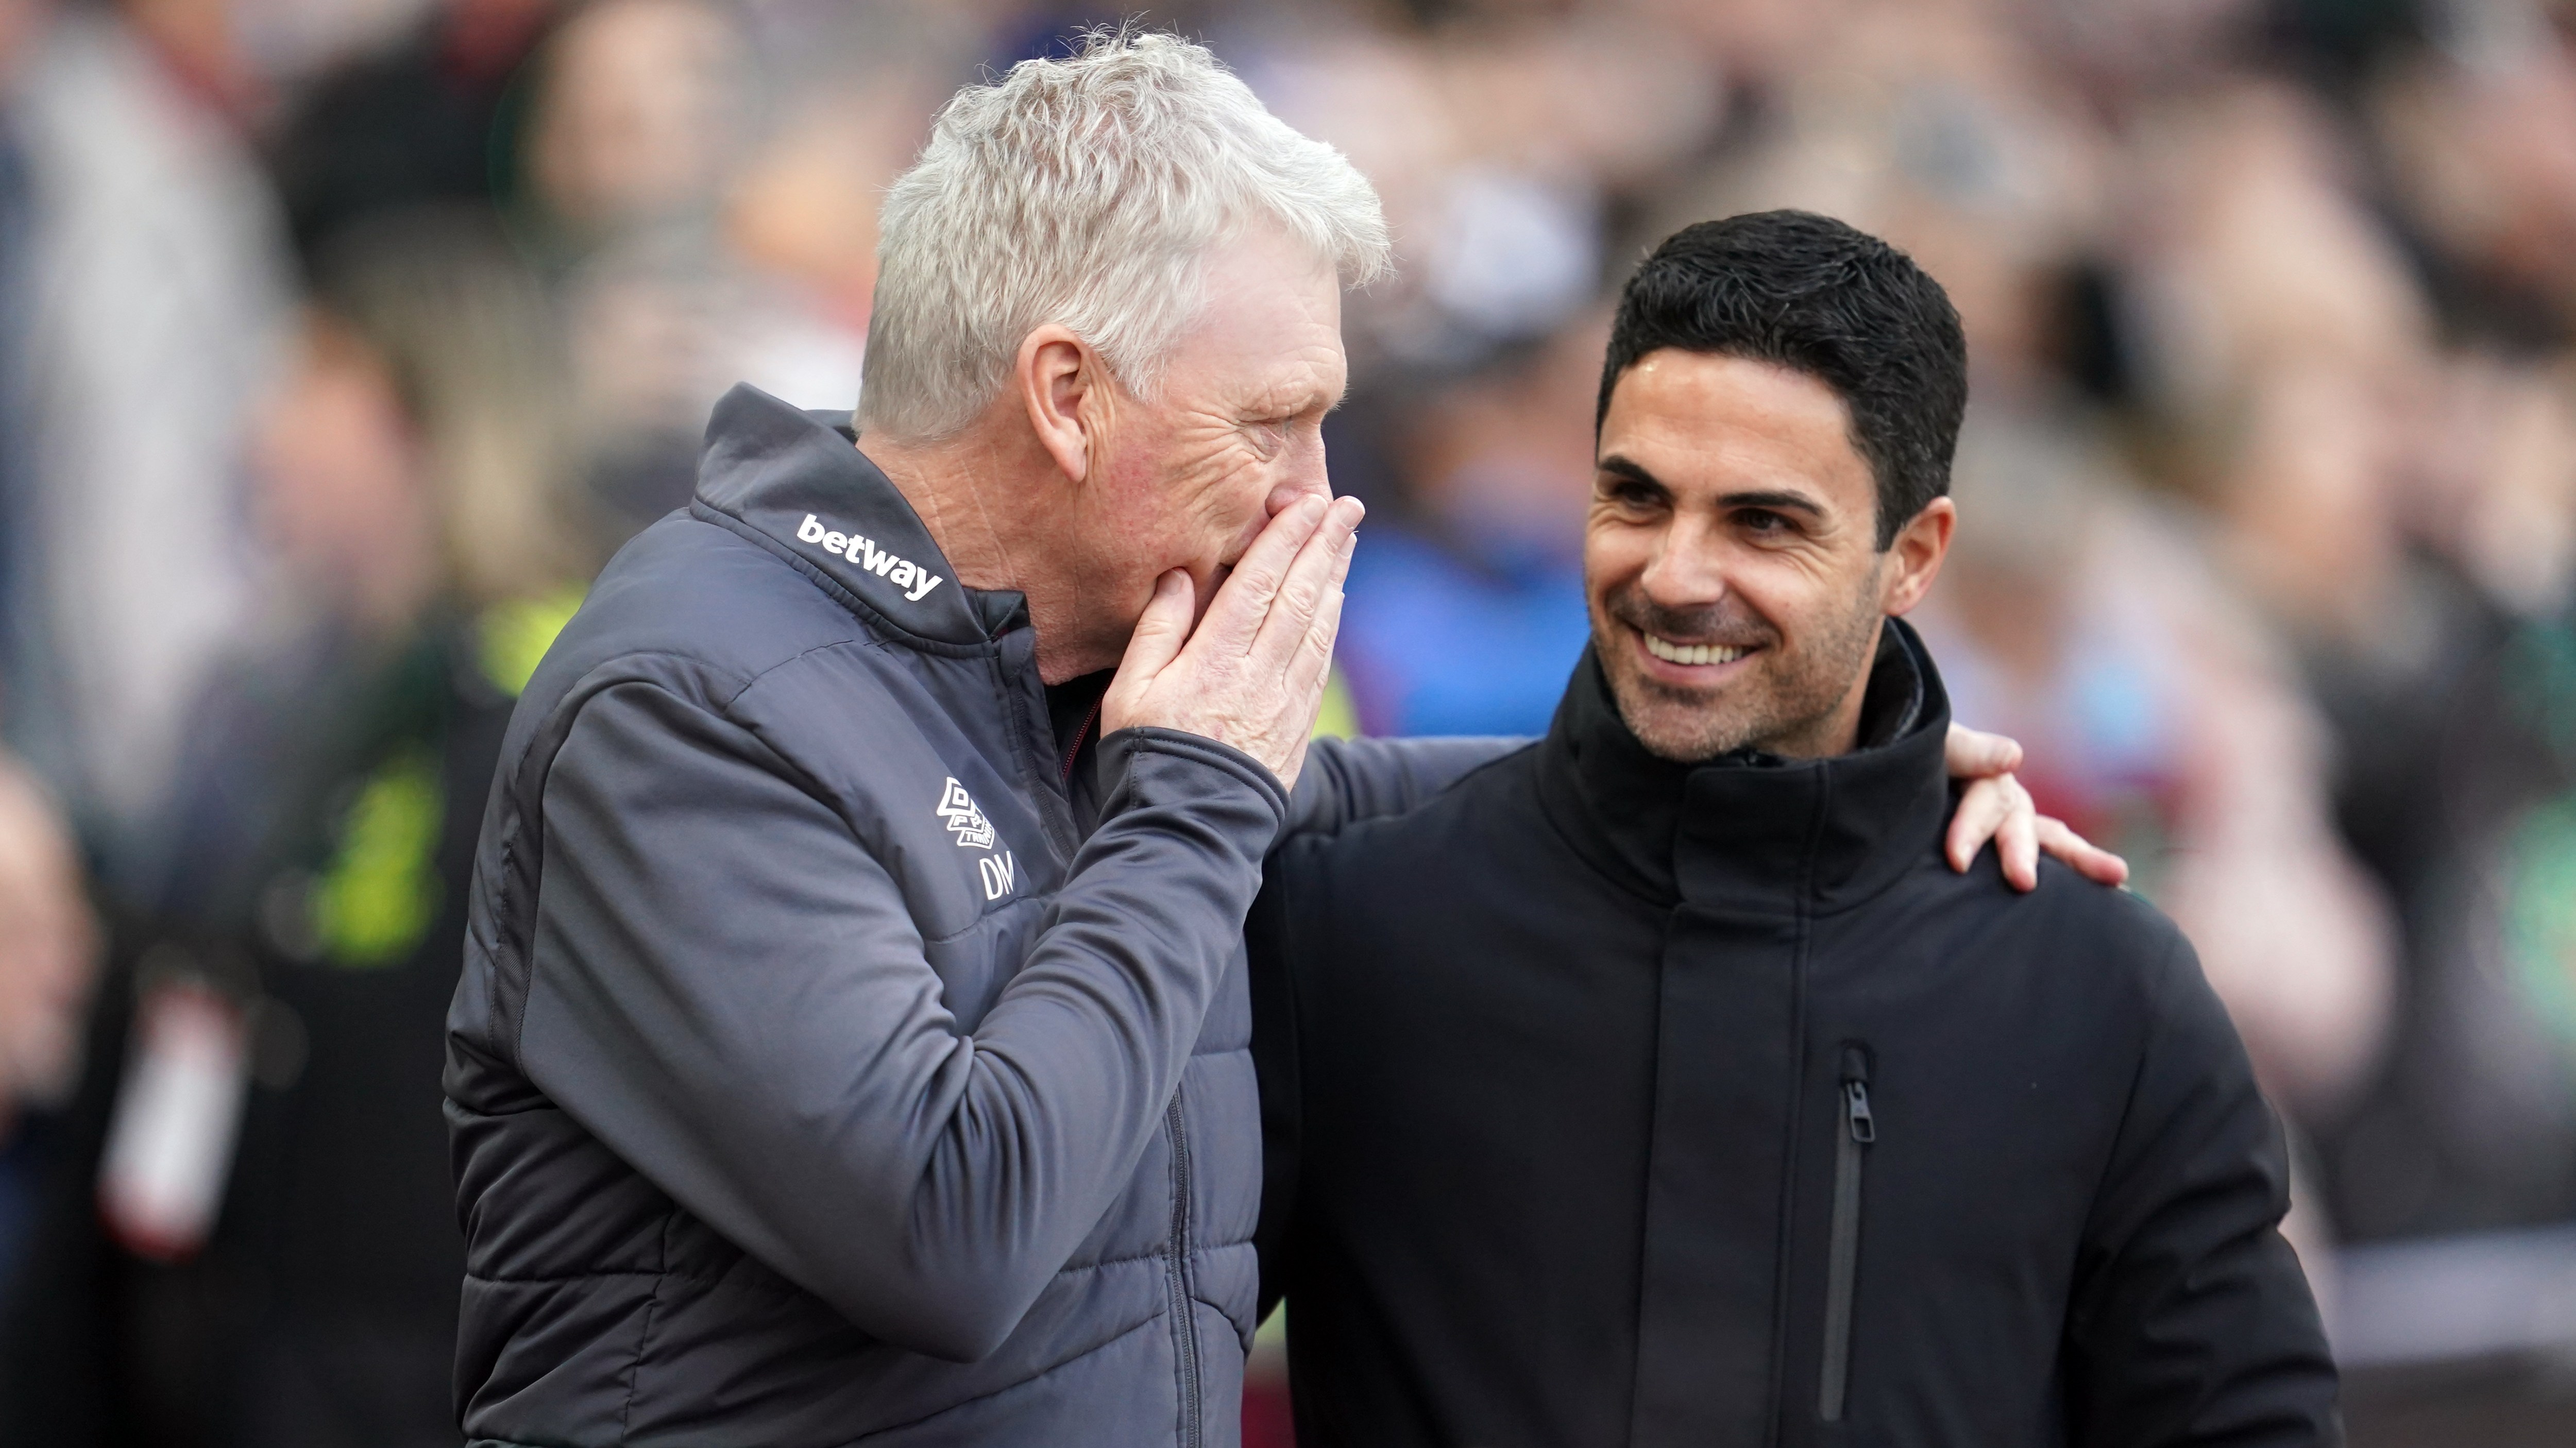 Moyes: West Ham want to beat City – but not for Rice and Arteta